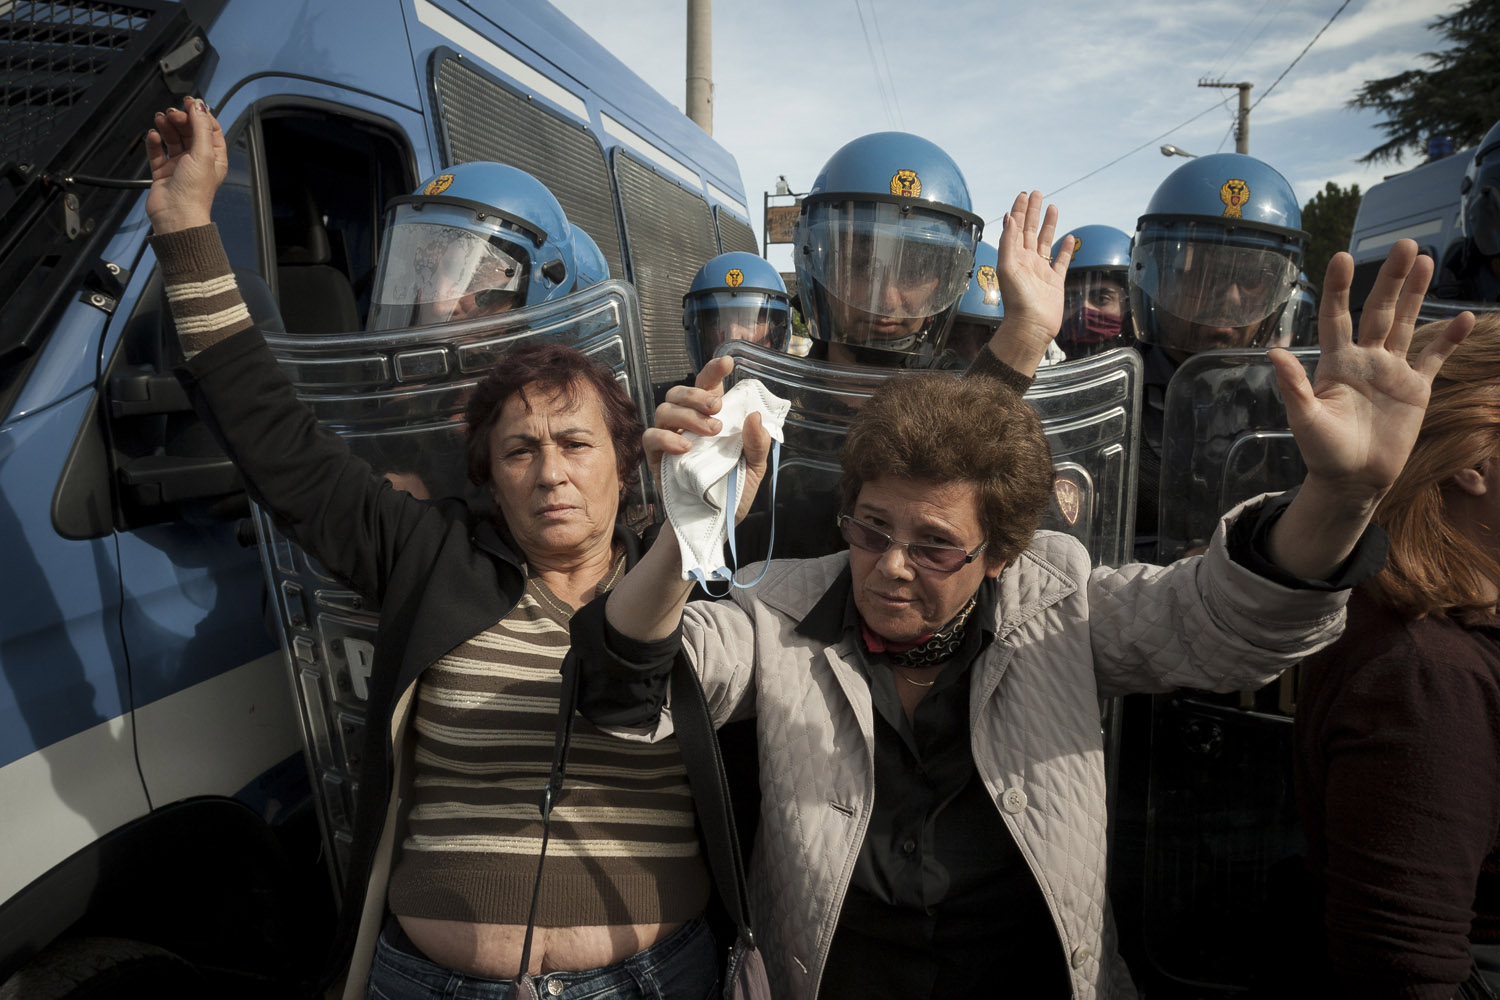 Two women from the “Volcanic Mothers” committee try to break through police lines and access Cava Sari. As the protests intensified and the garbage piled up in the streets of Napoli, a massive police deployment guarded the garbage dump and the roads leading to it. The dispersal of this group of women on the 18th of October led to the first violent clashes and provided the spark to set the situation on fire.